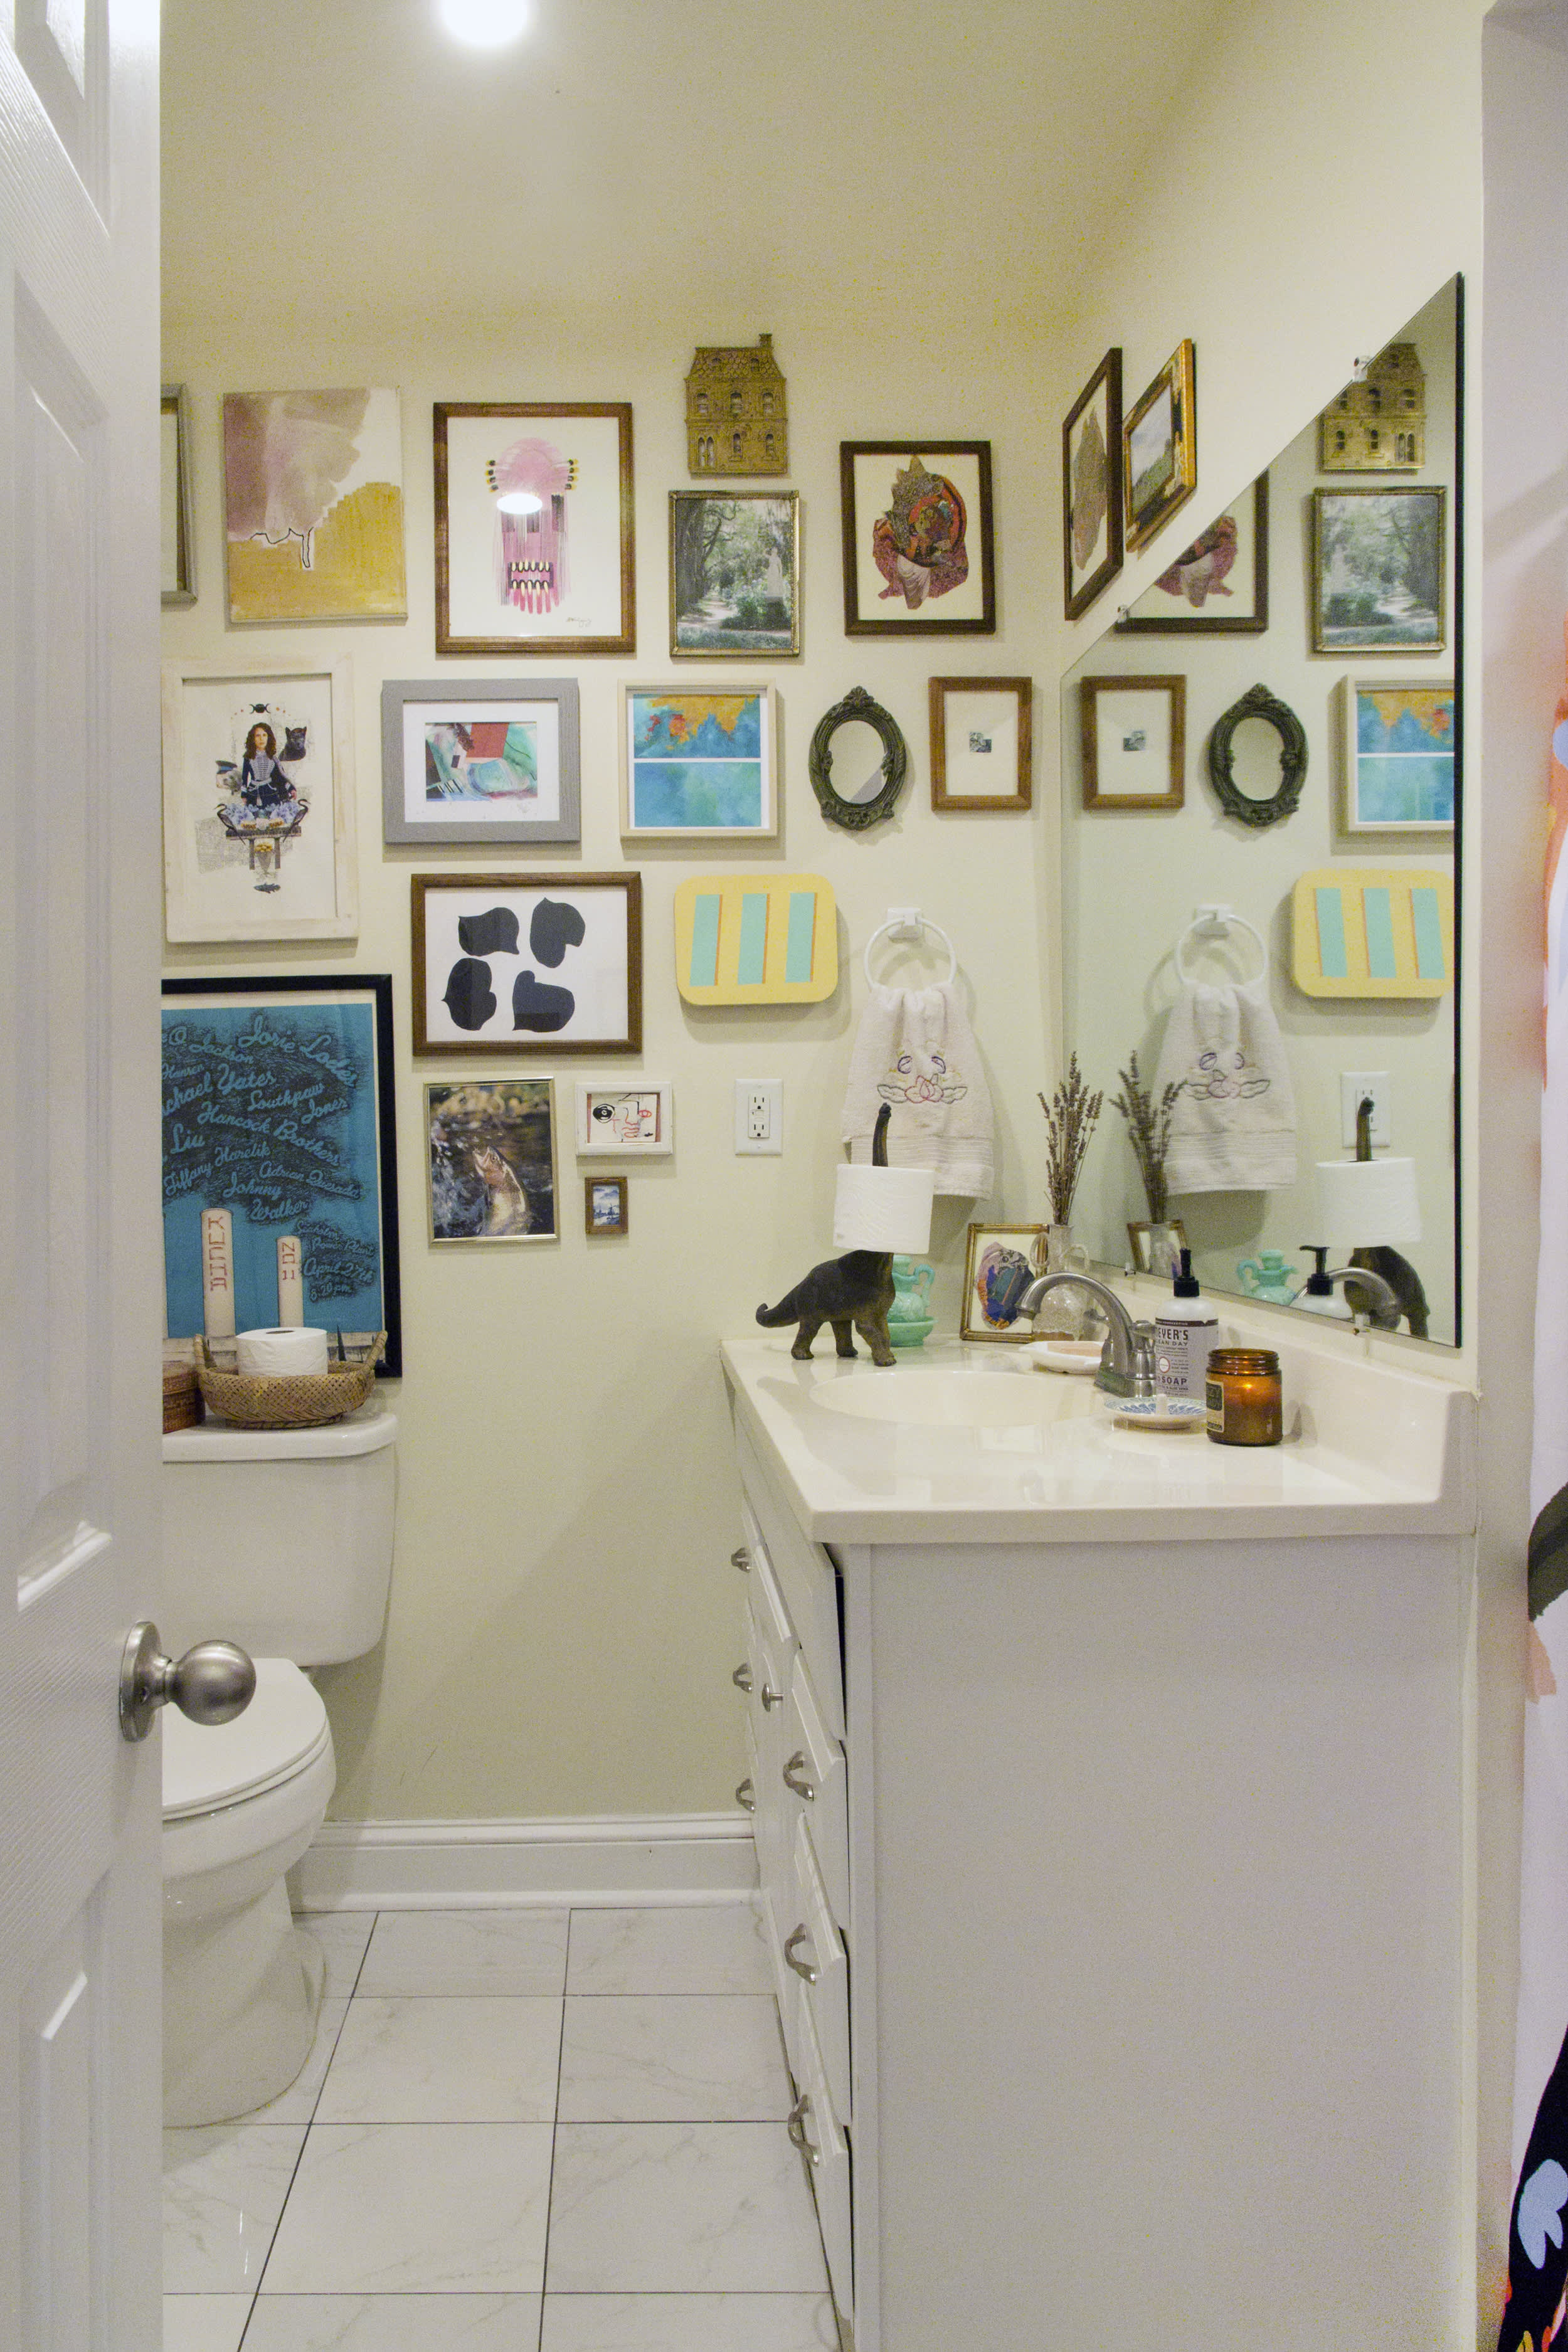 60 Small Bathroom Ideas for Decorating Tiny Spaces | Apartment Therapy